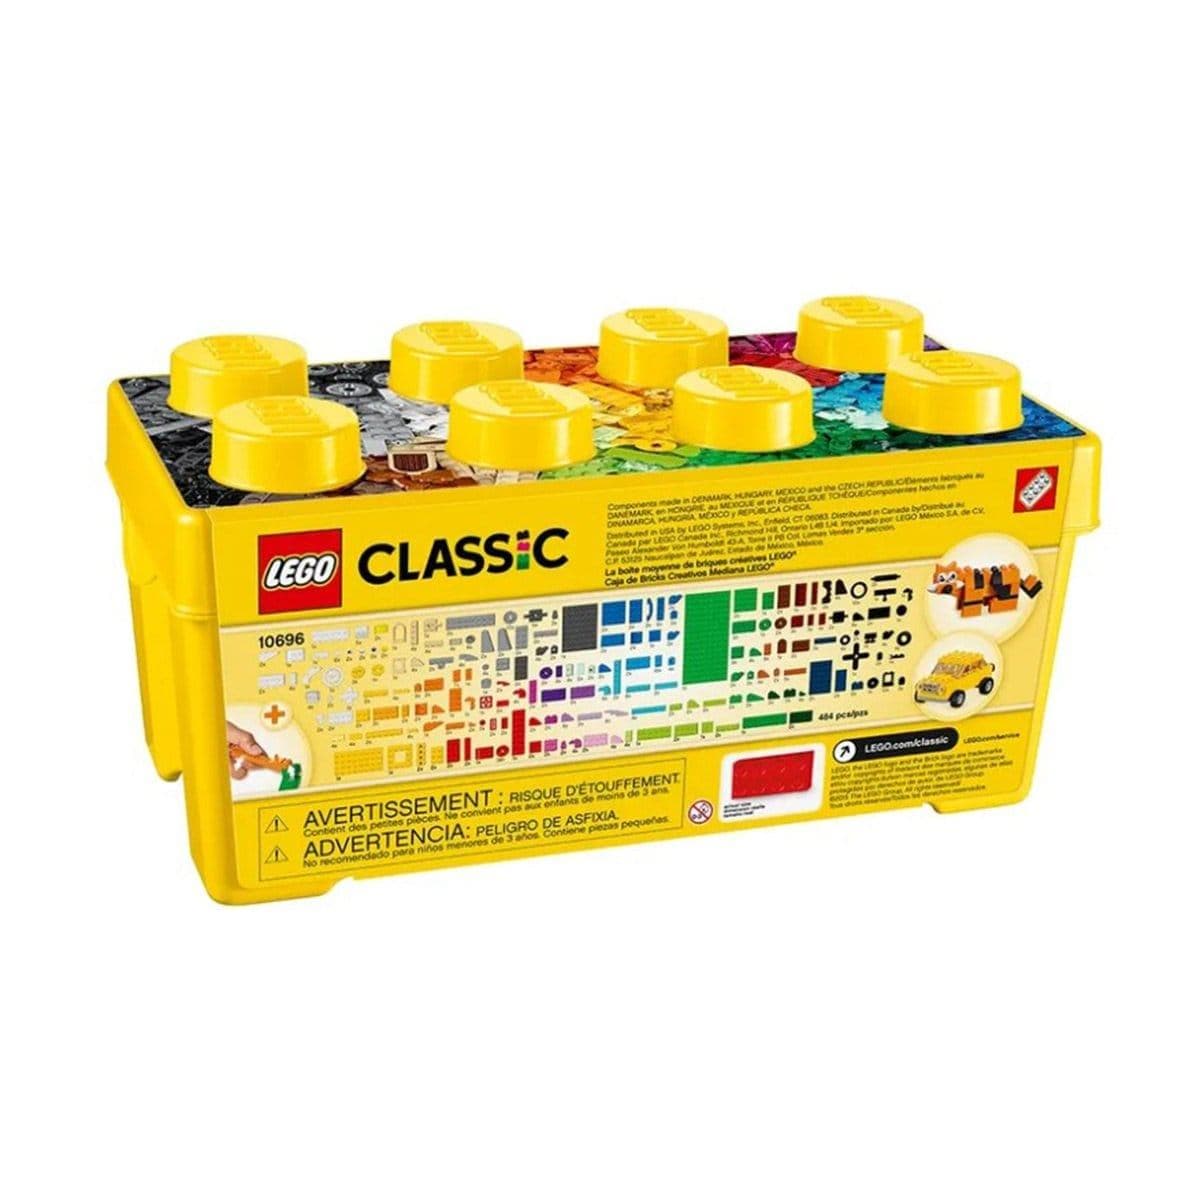 Buy Toys & Games Medium Creative Brick Box, Lego Classic sold at Party Expert